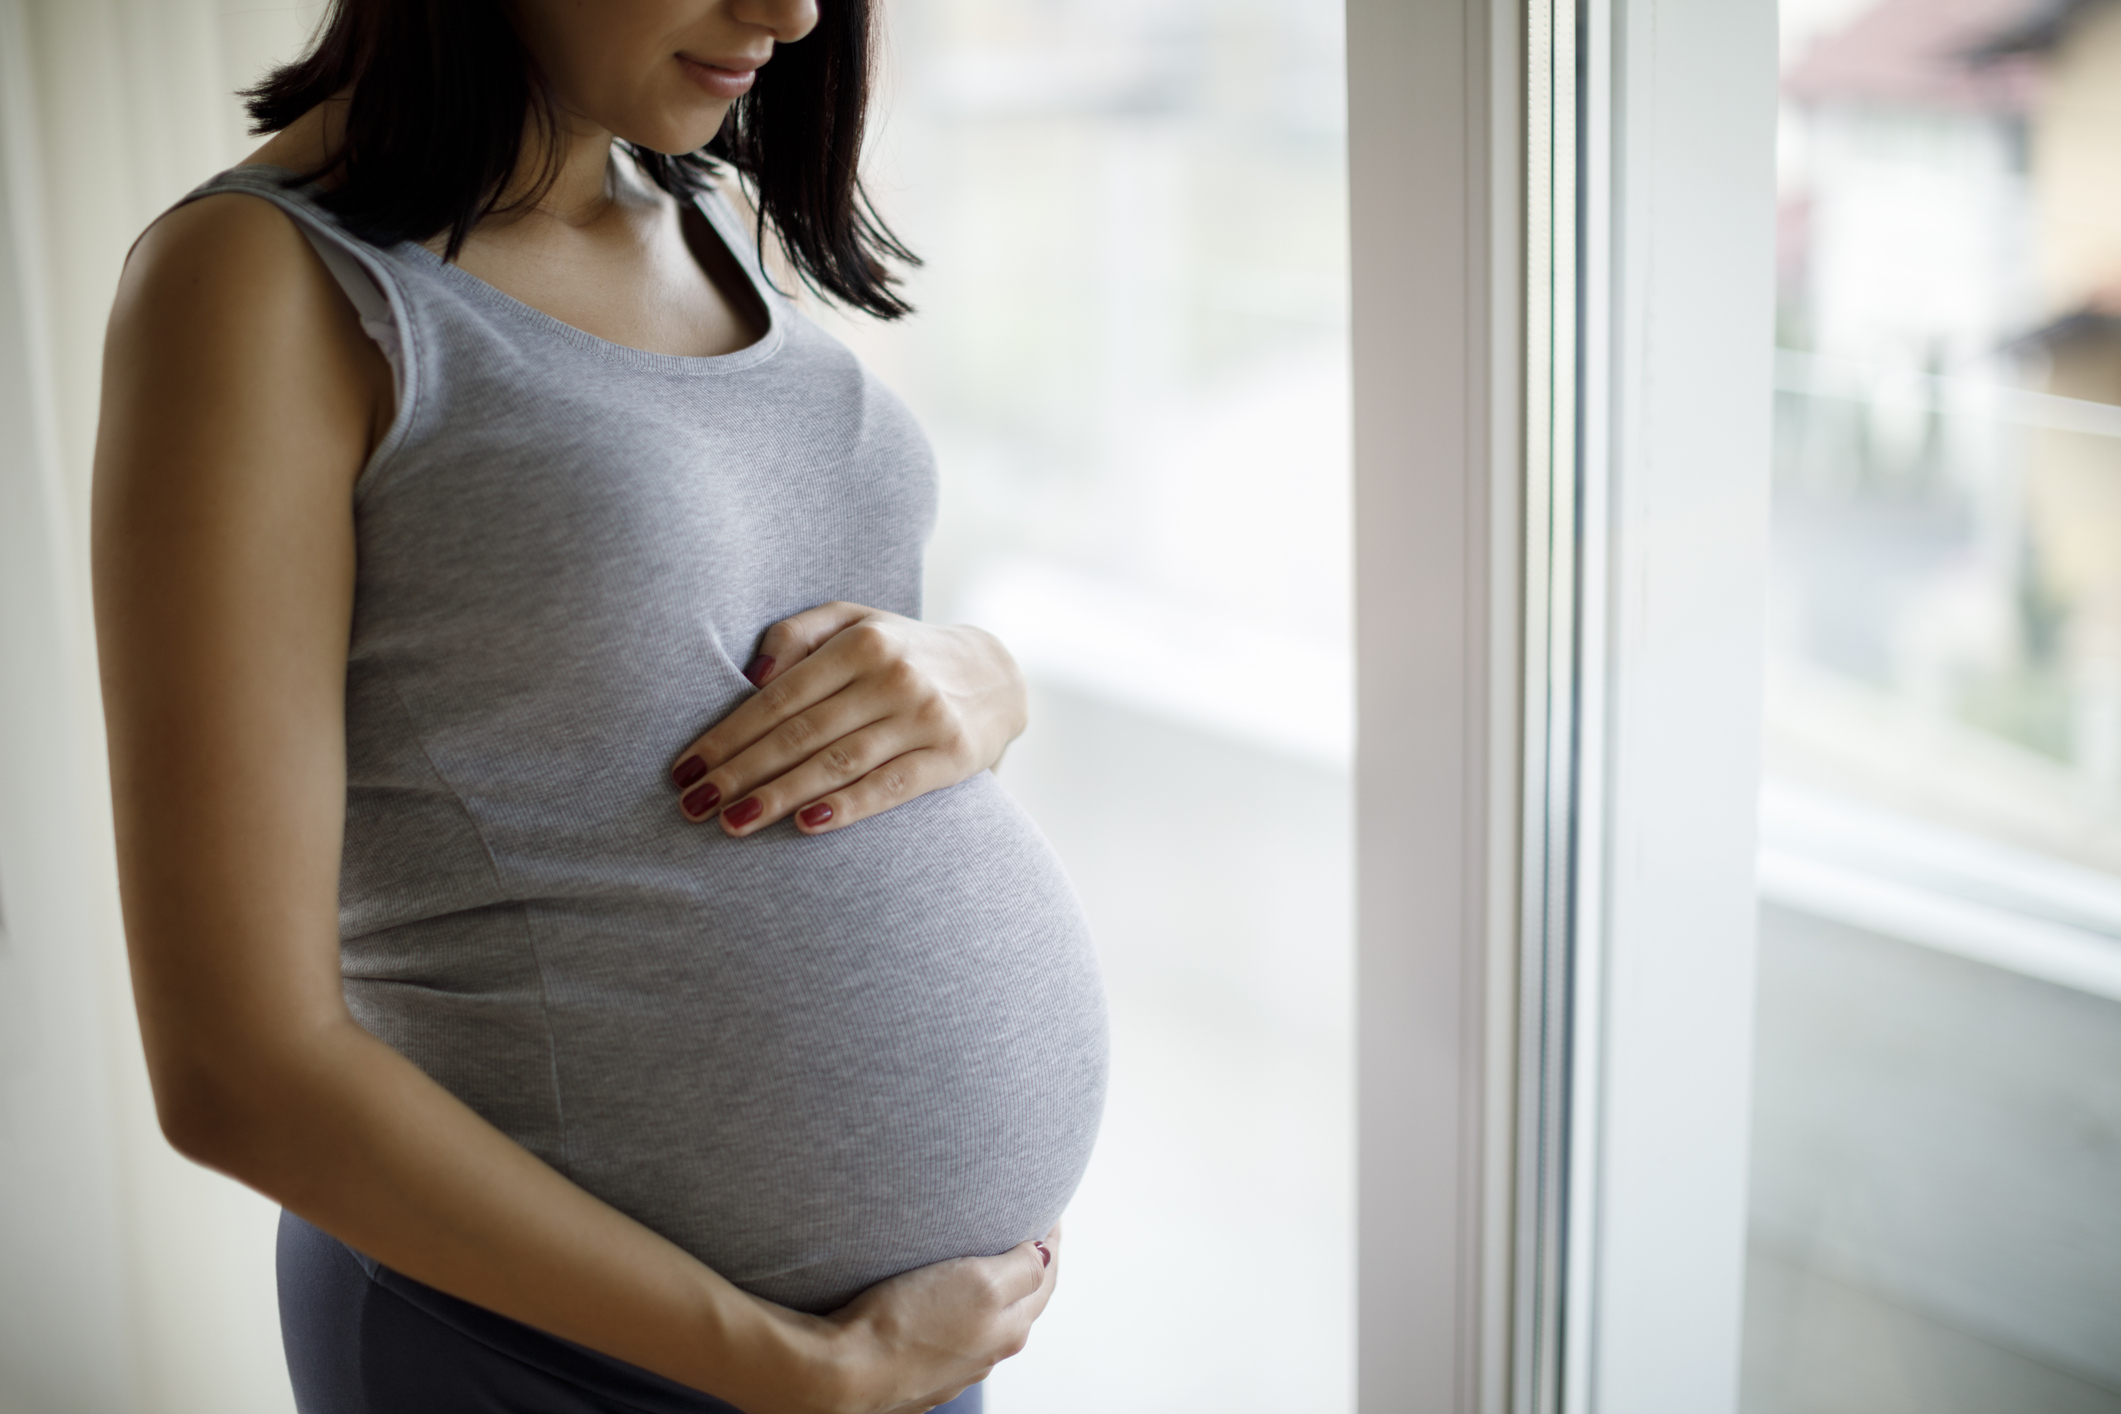 Pregnant Women In Third Trimester Unlikely To Pass Sars Cov 2 Infection